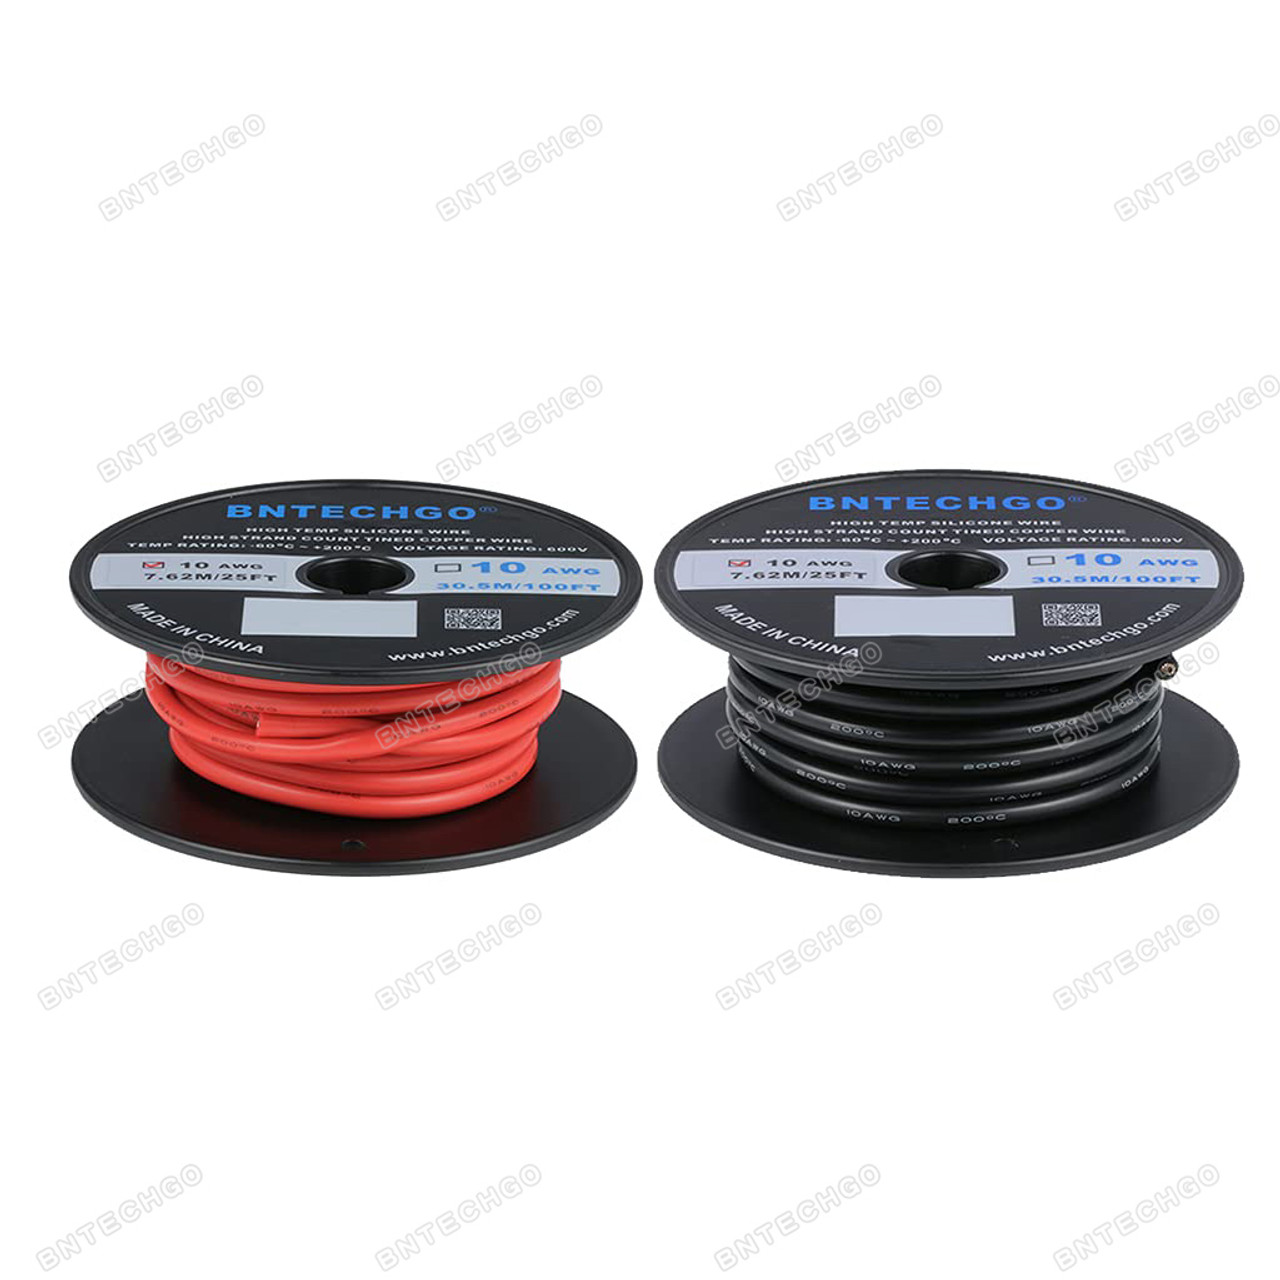 10 Gauge Silicone Wire 10 Feet - 10 AWG Silicone Wire - Flexible Silicone  Wire